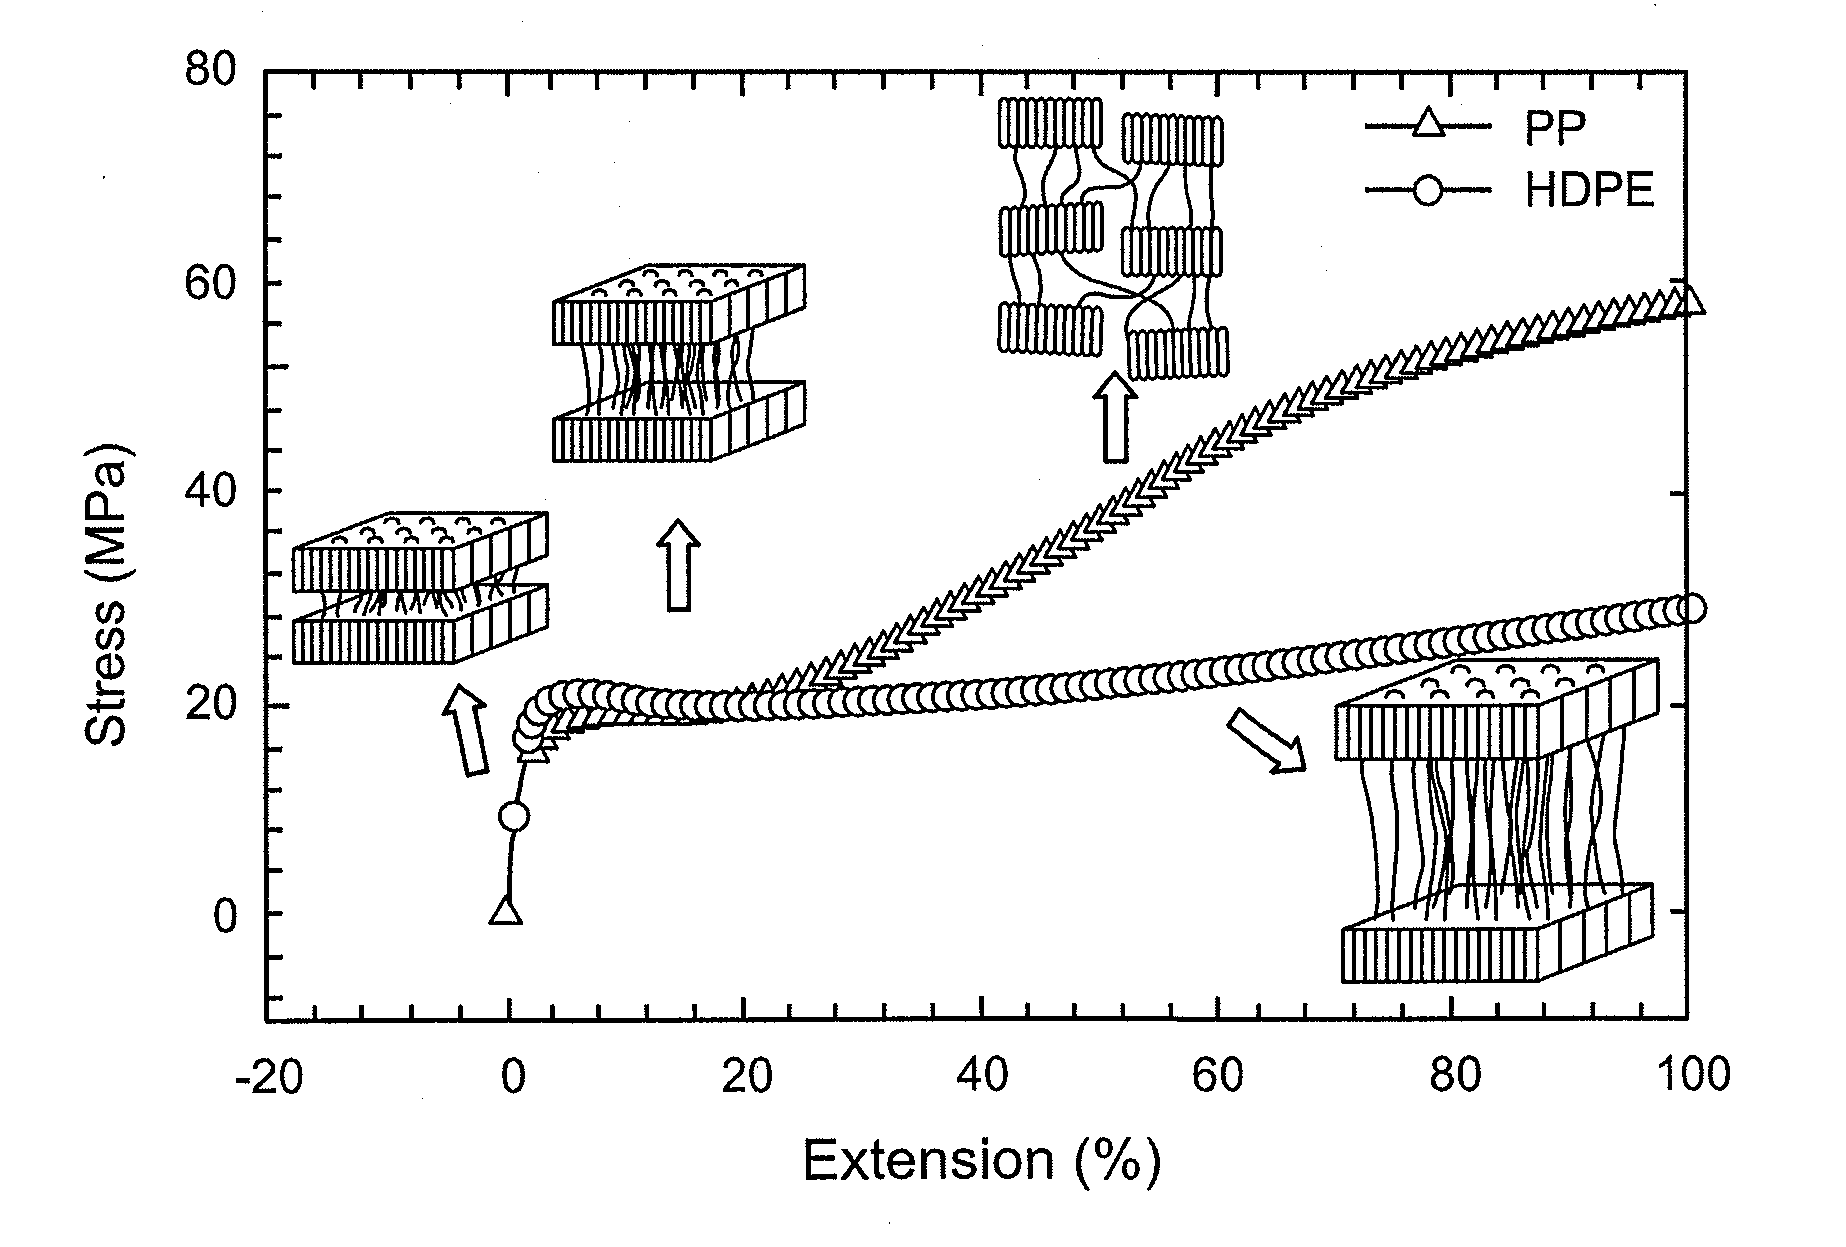 Multilayer microporous separators for lithium ion secondary batteries and related methods